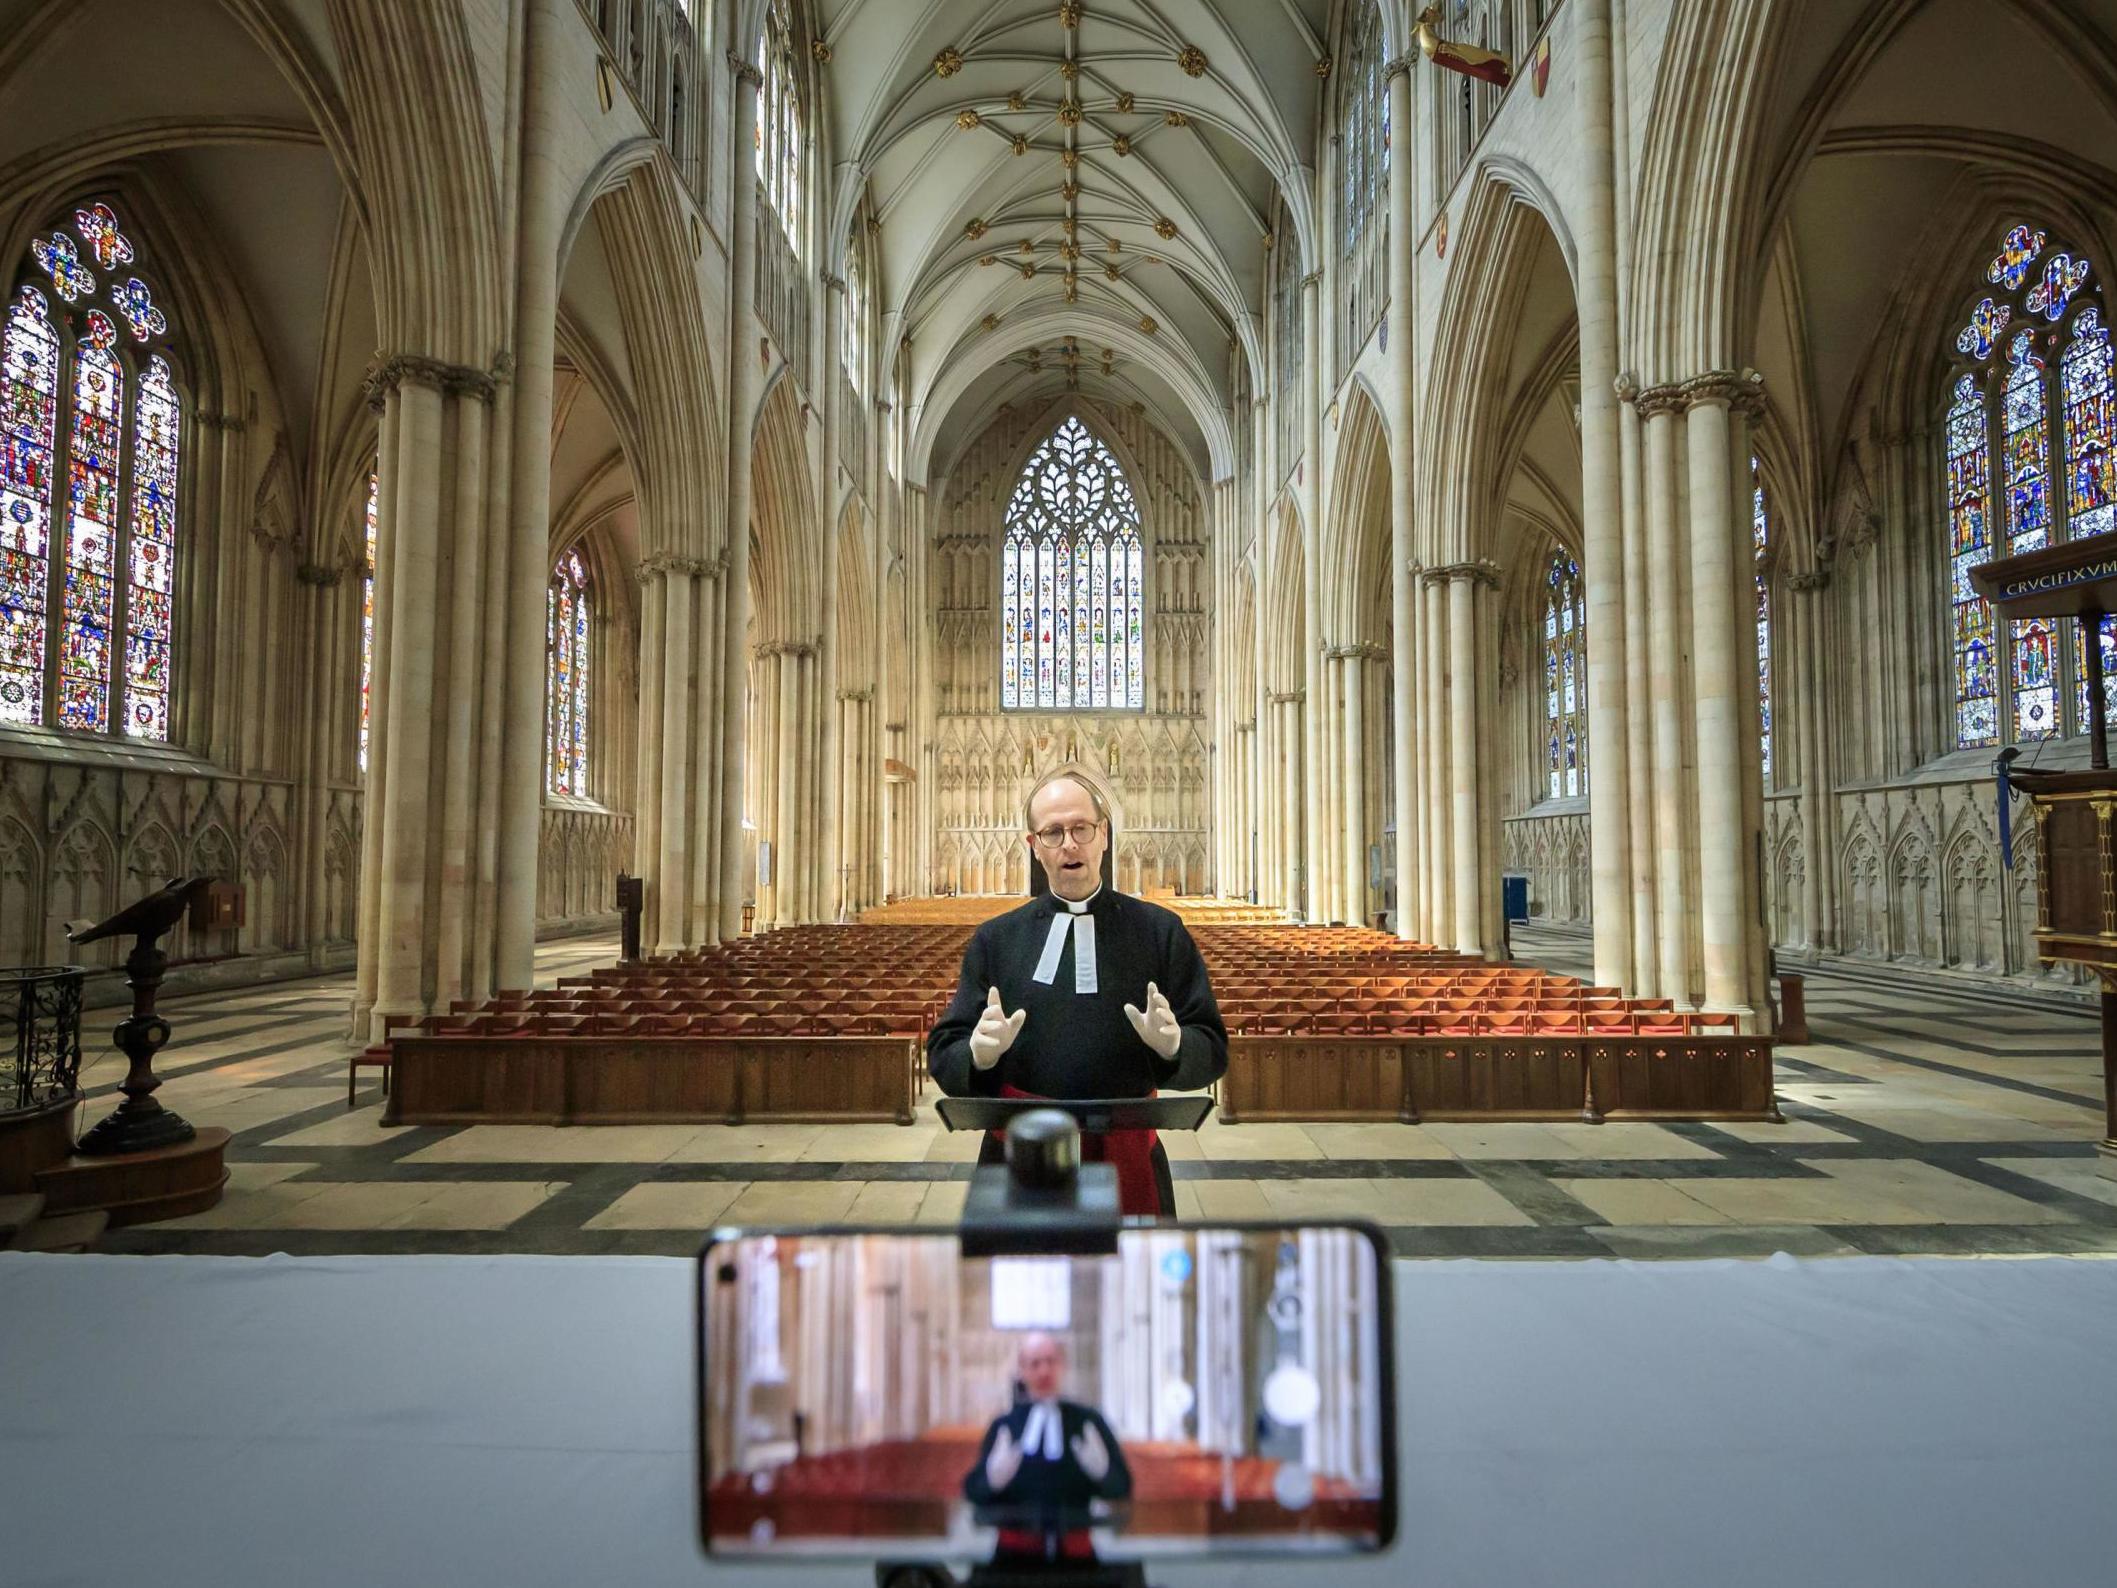 The Revd Michael Smith, York Minster's Canon Pastor, rehearses a digital Evensong service inside the cathedral, as the government moves towards the introduction of measures to bring the country out of lockdown